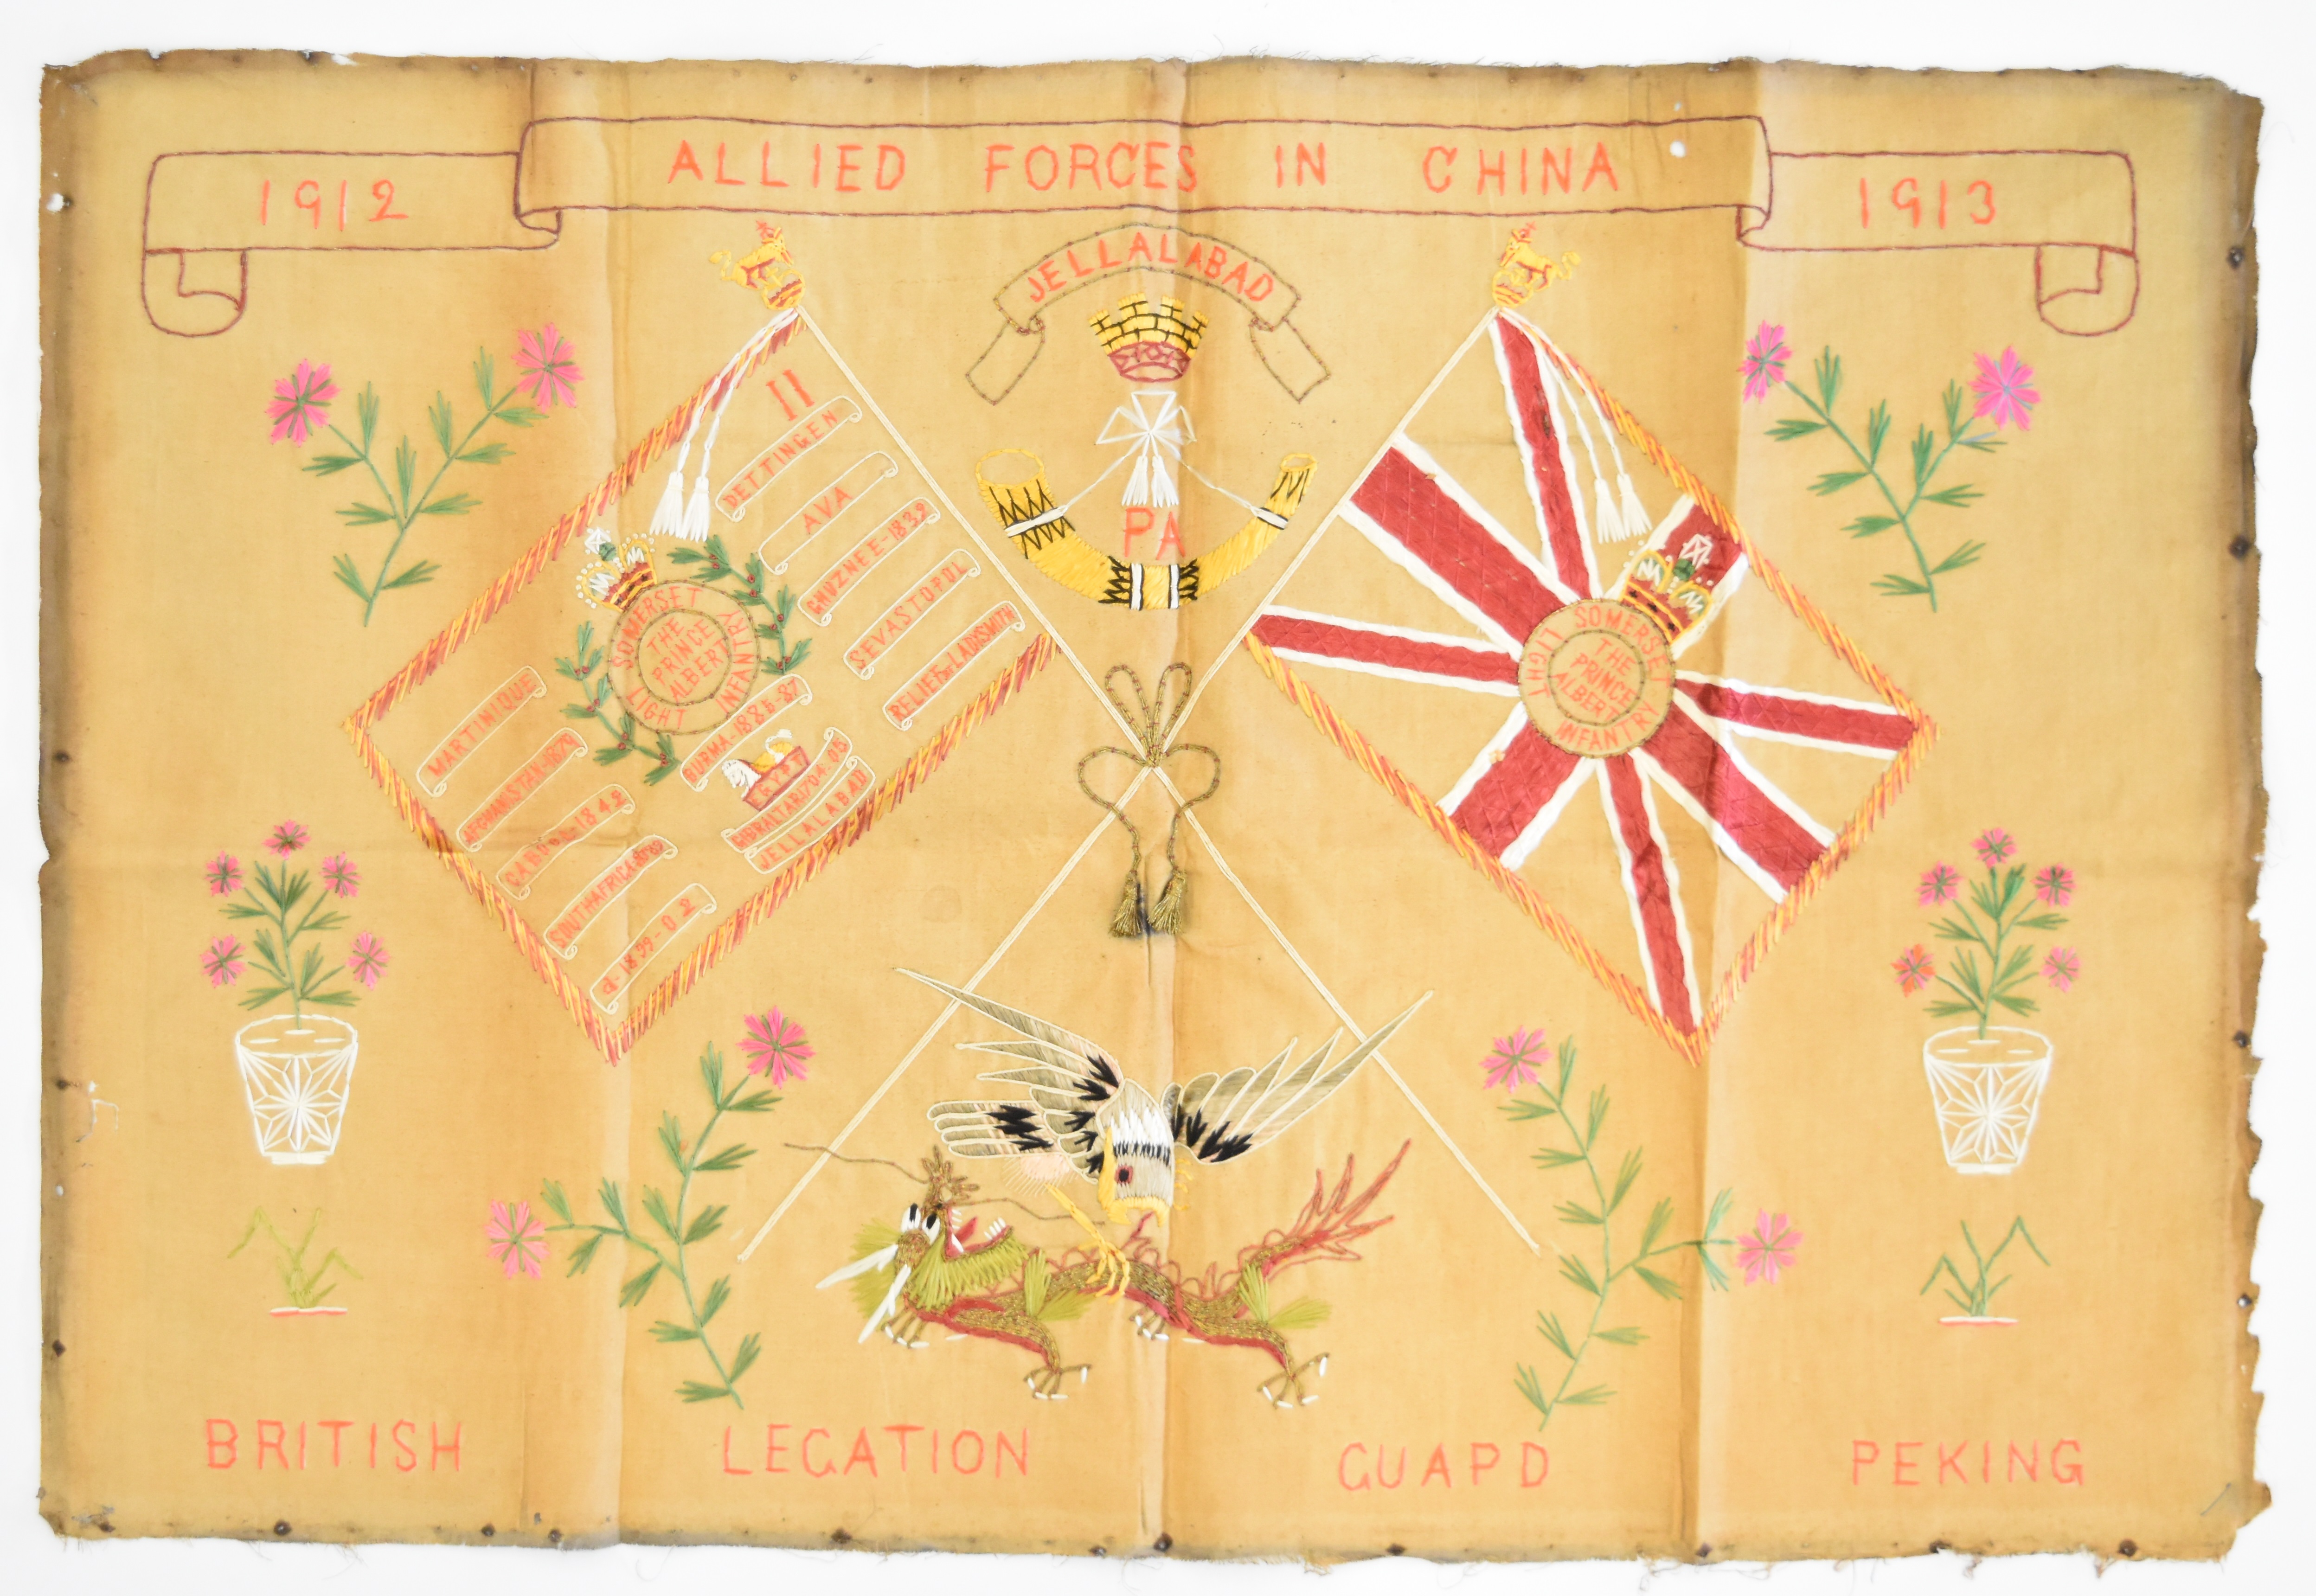 Somerset Light Infantry interest silk work panel to commemorate the British Ligation Allied Forces